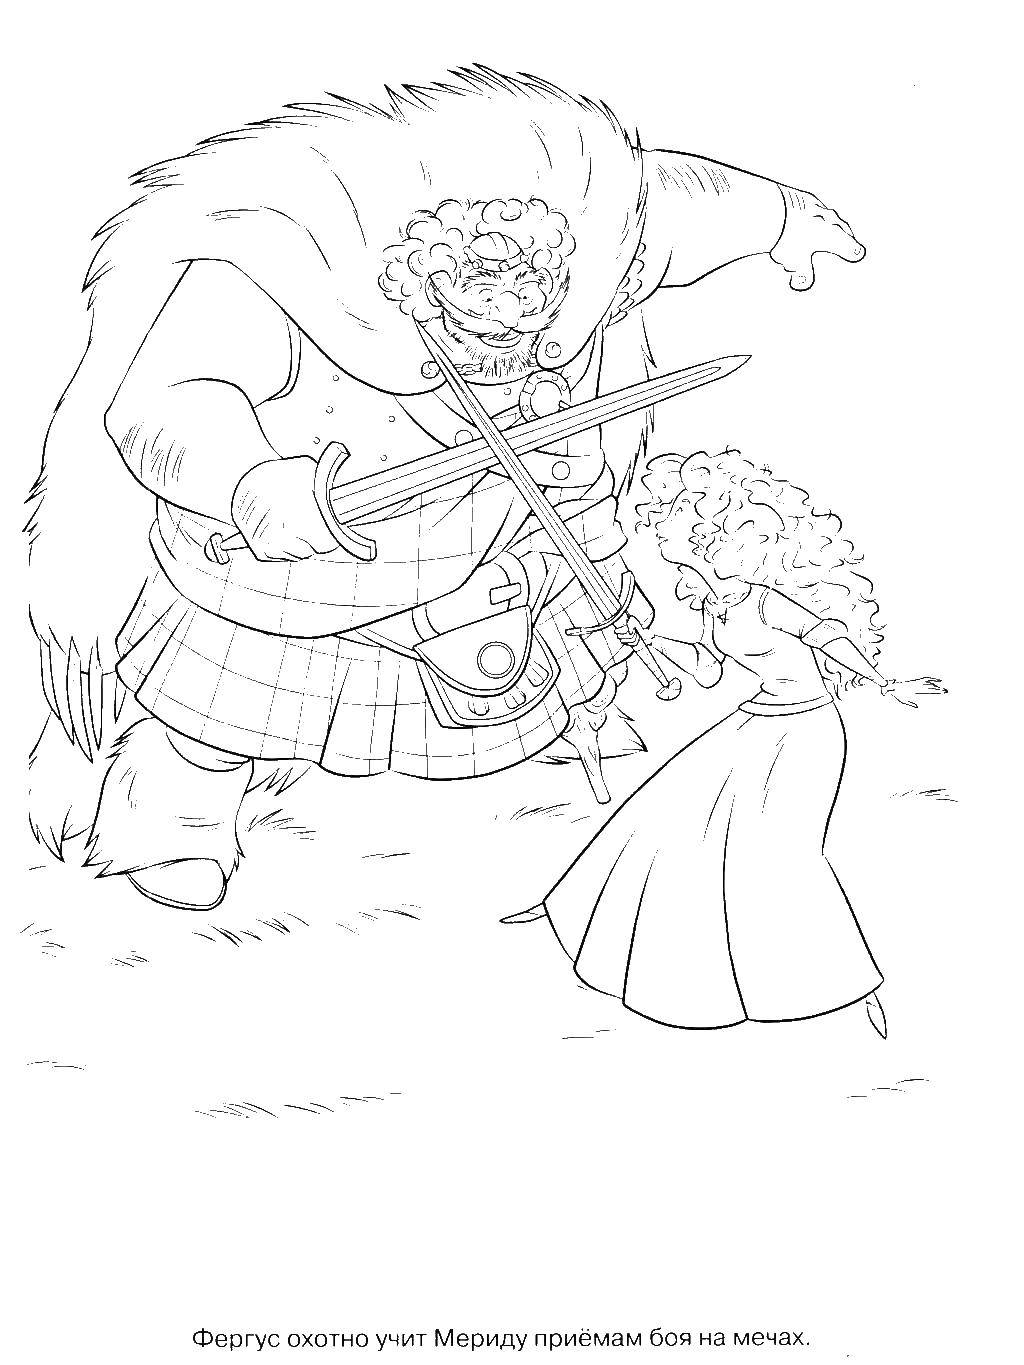 Coloring The father of Merida teaches eejits swords. Category brave heart. Tags:  Merida, brave.